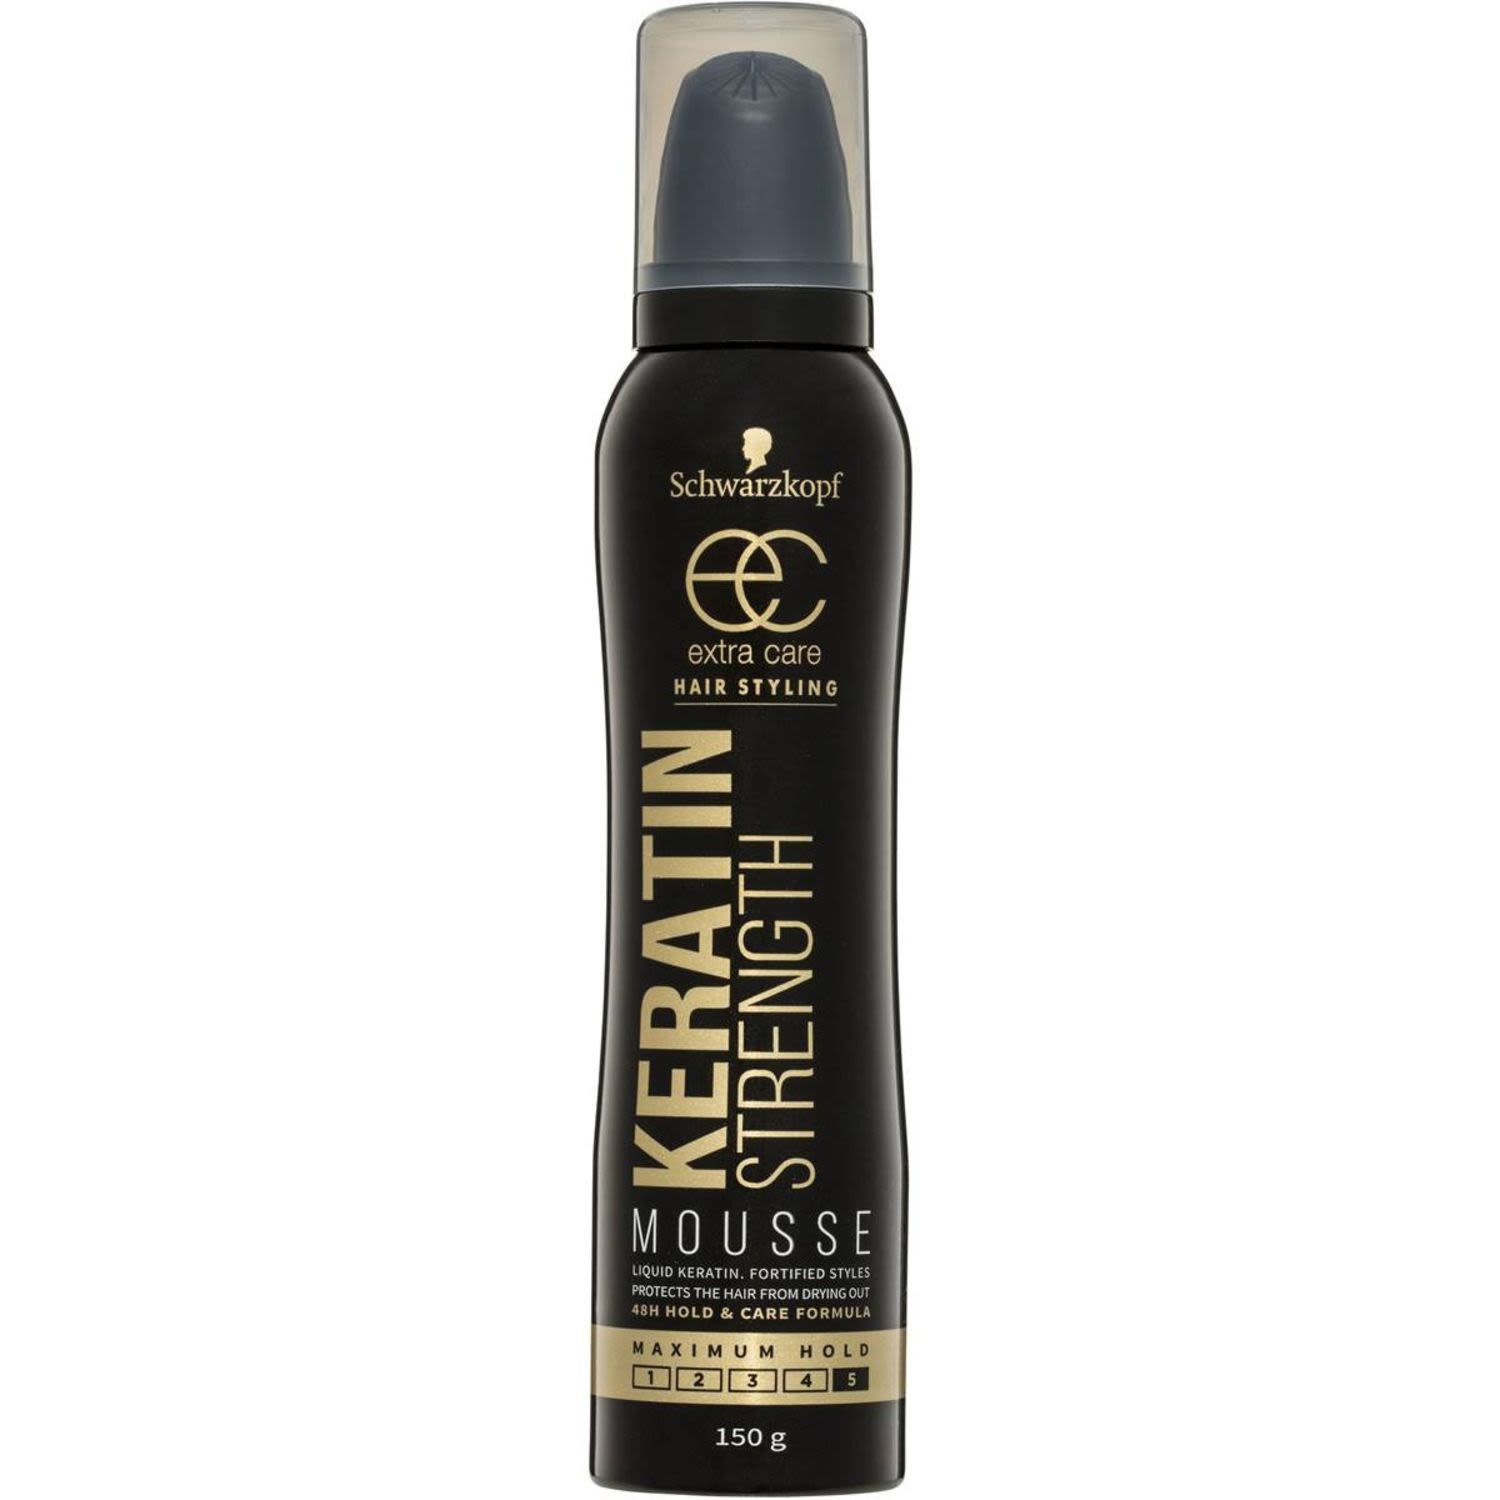 Schwarzkopf Extra Care Mousse Ultra Styling Extreme Hold, 150 Gram